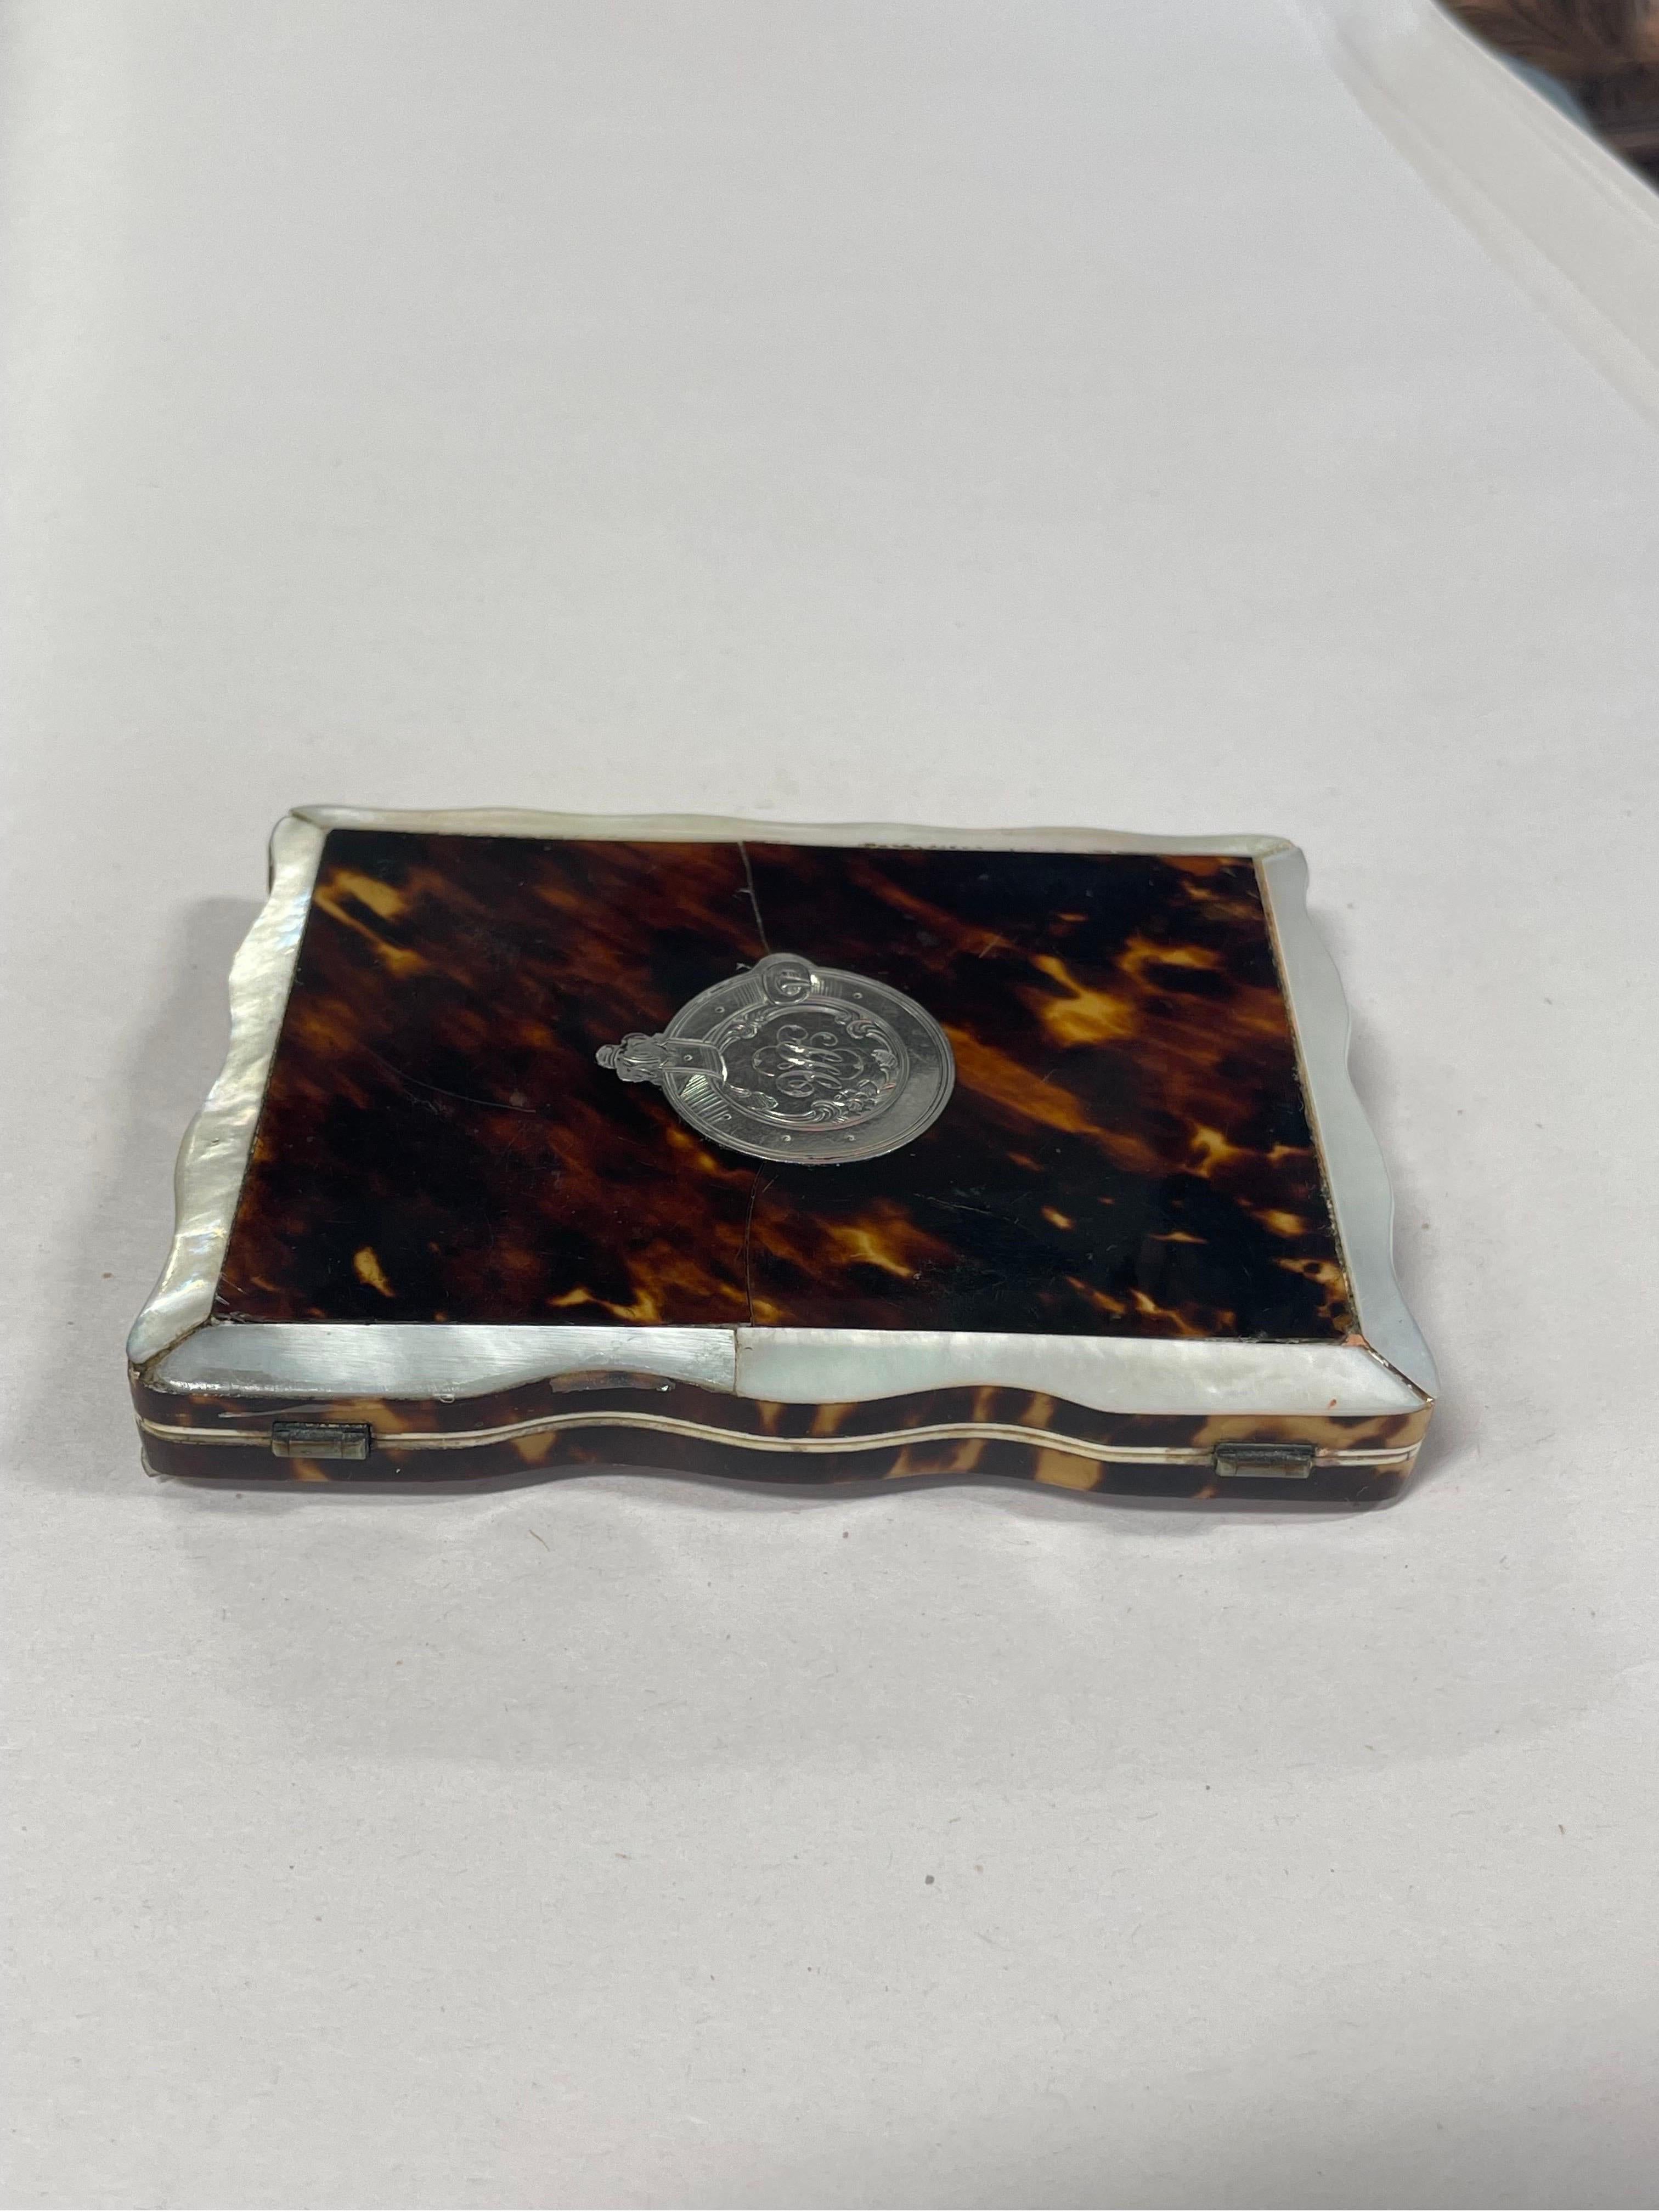 An antique english card case holder constructed from tortoiseshell, mother of pearl and sterling silver.